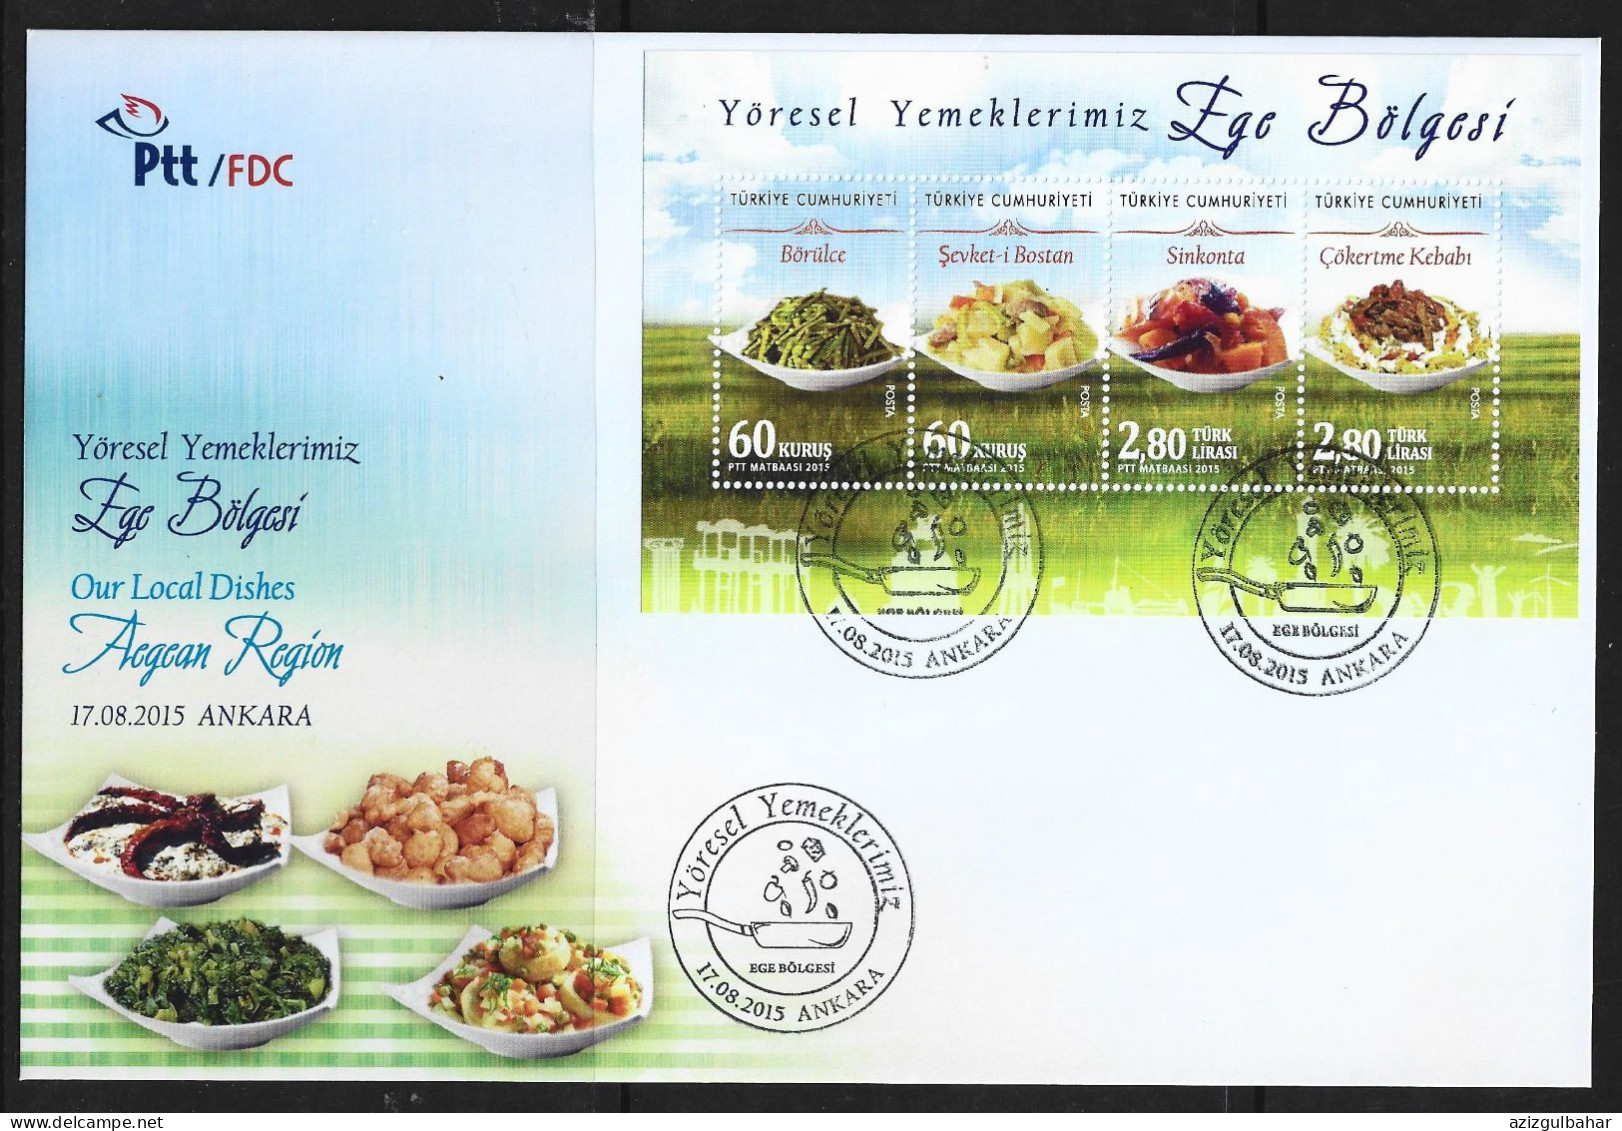 TURKEY - OUR LOCAL DISHES (AEGEAN REGION)  -  17 AUGUST 2015- FDC - FDC